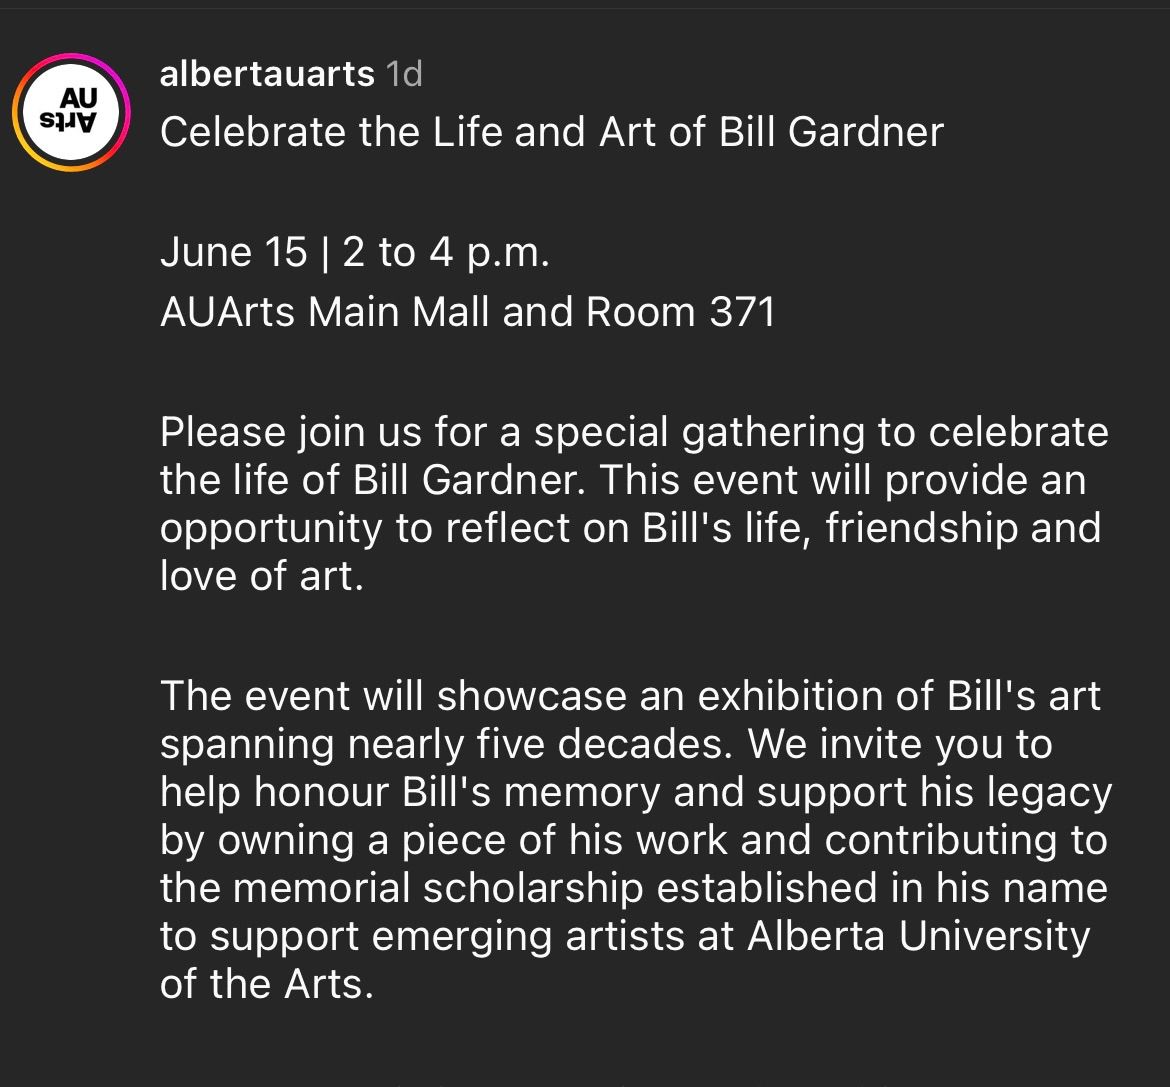 Celebrating the Life and Legacy of Bill Gardner